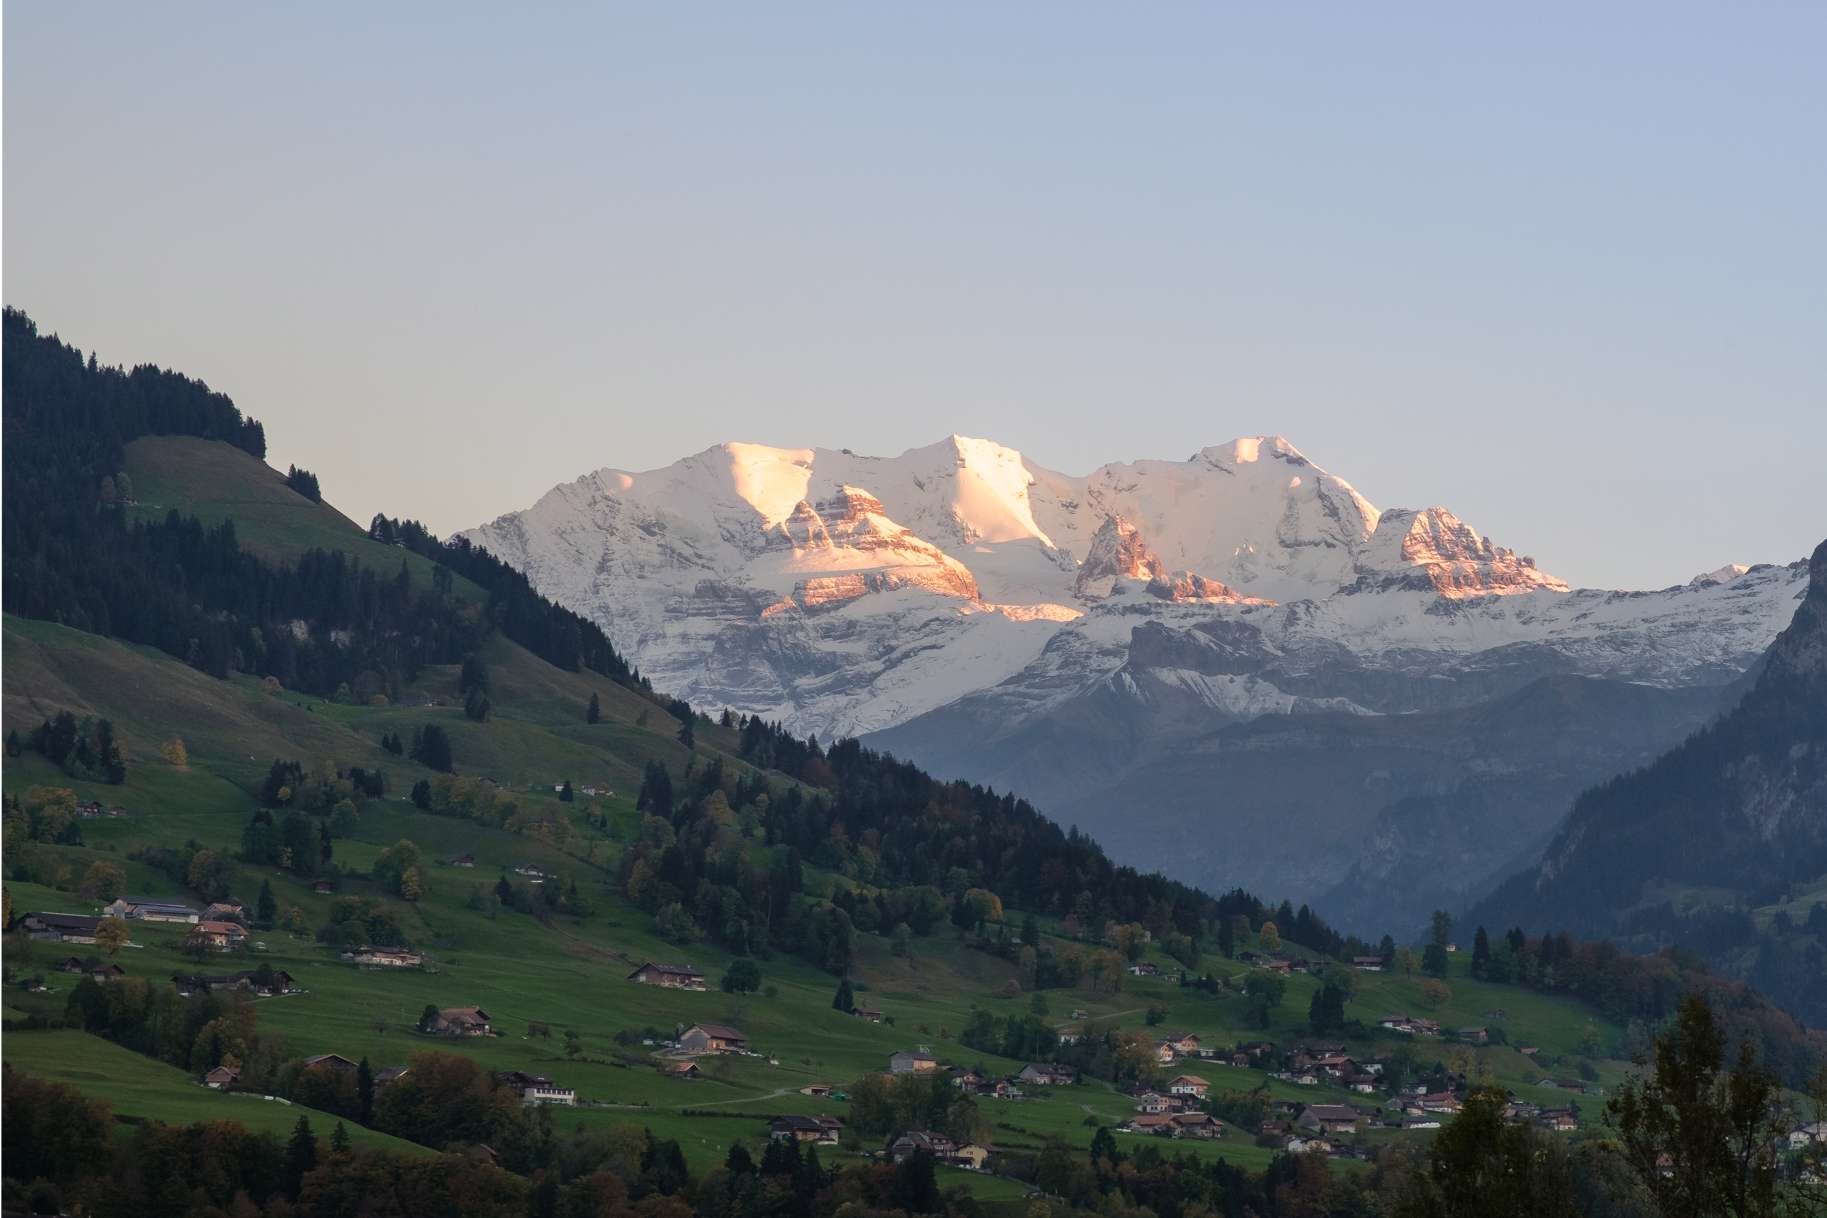 The Sunsetting over Jungfrau with a cute alpine village in the foreground